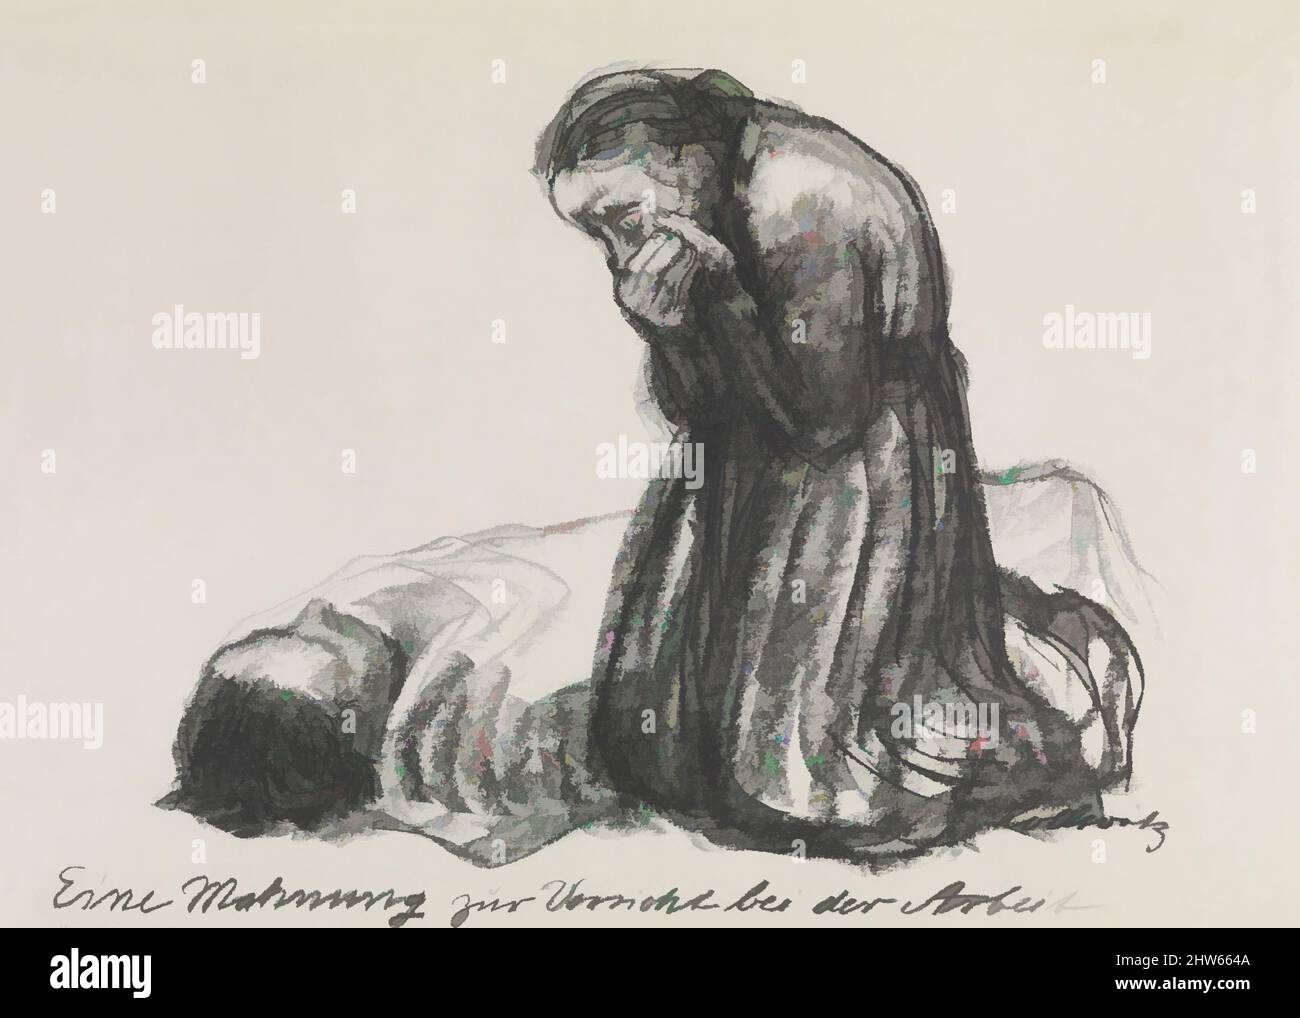 Art inspired by A Warning To Be Careful While Working (Eine Mahnung zur Vorsicht bei der Arbeit), n.d., Photo-lithograph, sheet: 16 1/8 x 22 1/16 in. (41 x 56 cm), Prints, Käthe Kollwitz (German, Kaliningrad (Königsberg) 1867–1945 Moritzburg, Classic works modernized by Artotop with a splash of modernity. Shapes, color and value, eye-catching visual impact on art. Emotions through freedom of artworks in a contemporary way. A timeless message pursuing a wildly creative new direction. Artists turning to the digital medium and creating the Artotop NFT Stock Photo